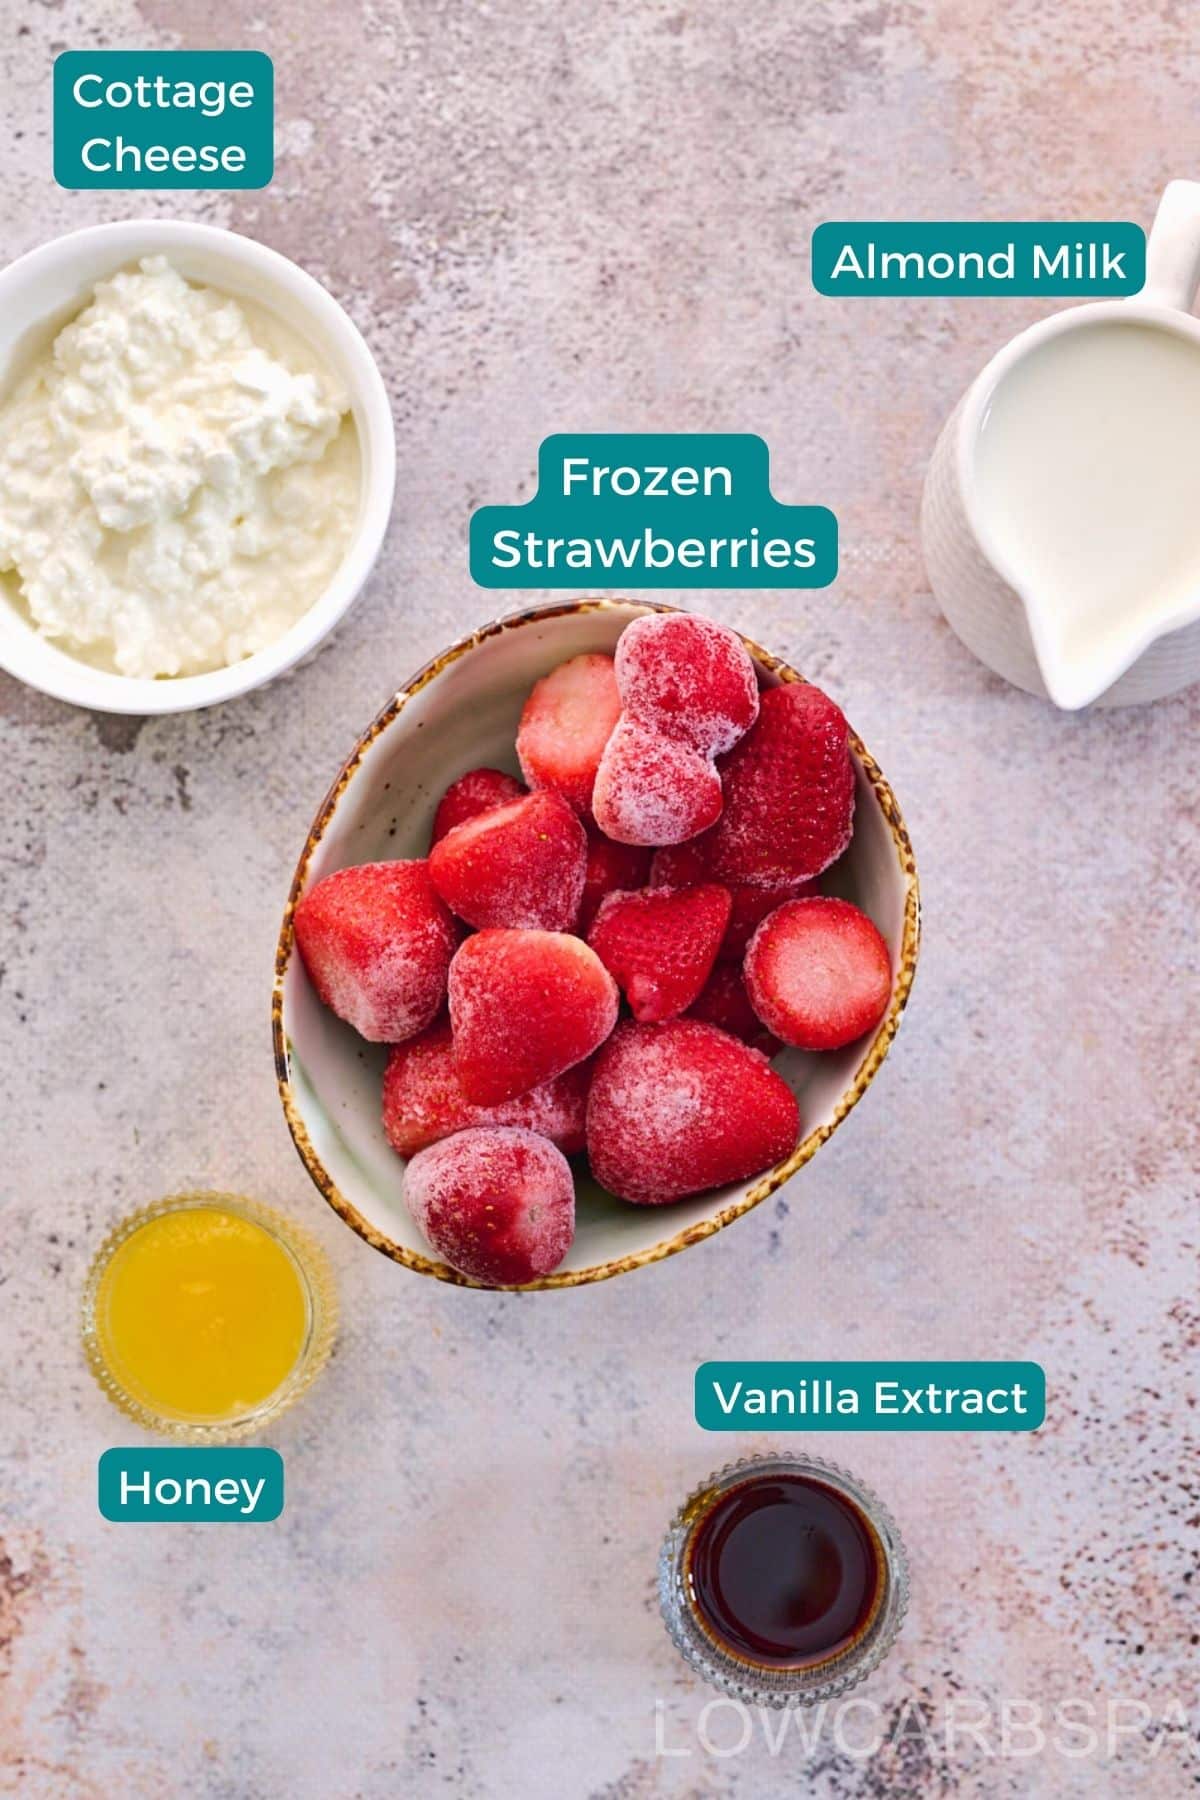 Cottage Cheese Smoothie Ingredients